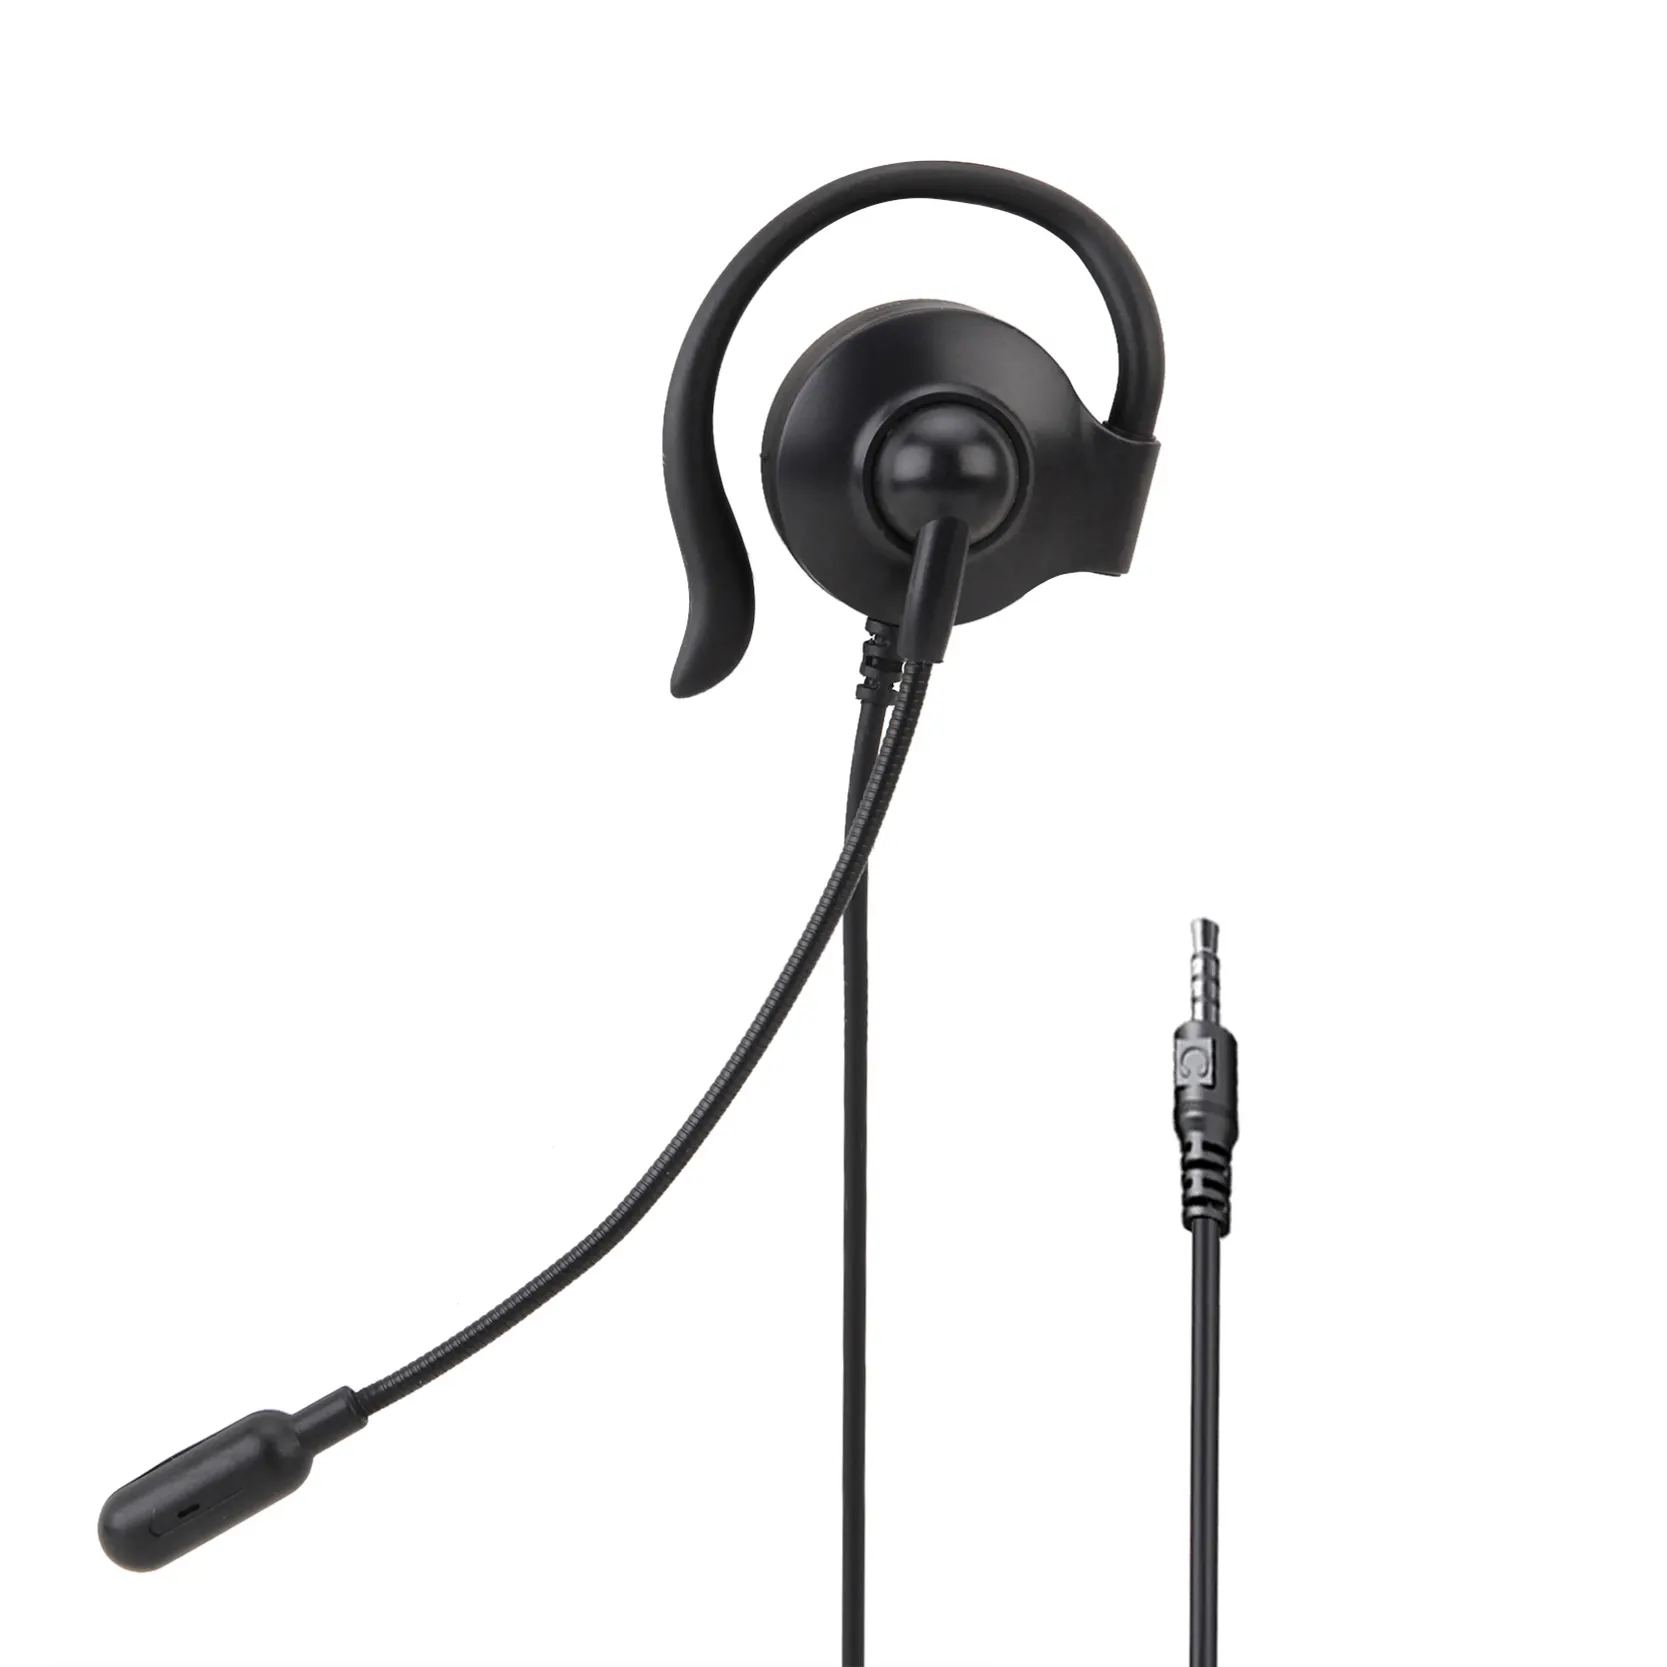 227 Unilateral earphone one side 3.5mm wired headset with mic volume control cheap price factory wholesale oem hot sale